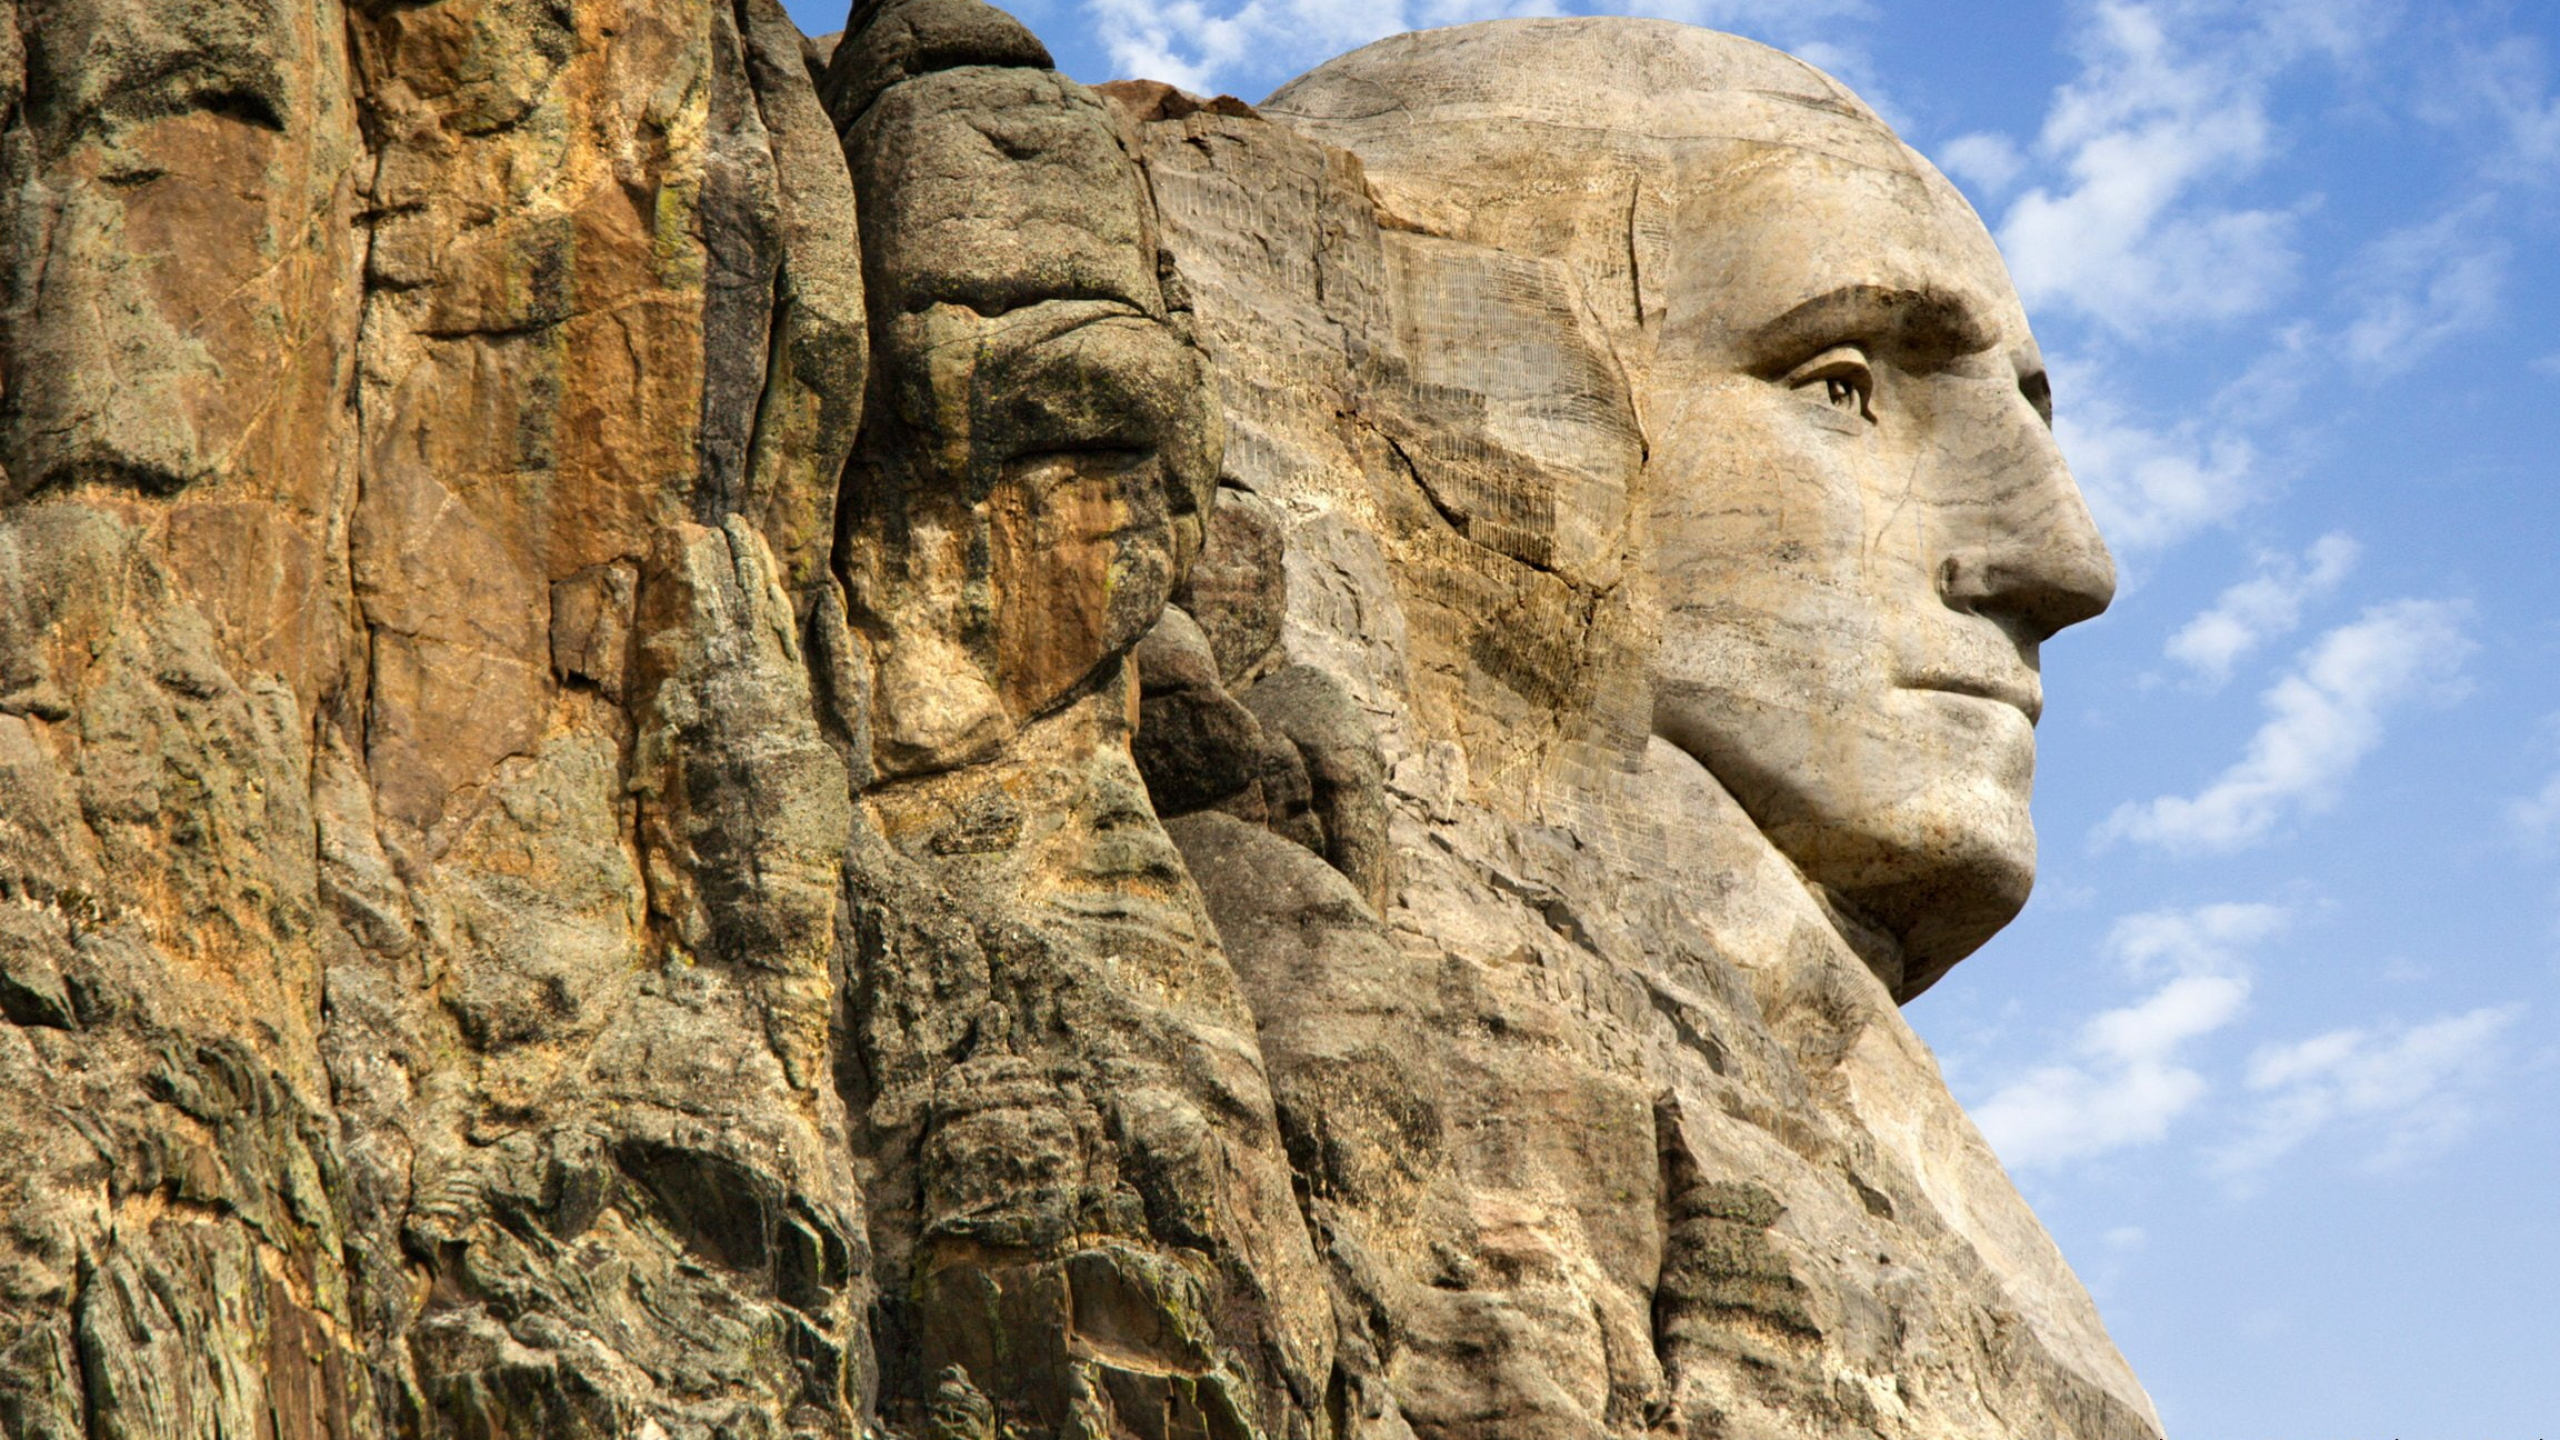 Mount Rushmore wallpaper, Posted by Zoey Thompson, Artistic depiction, Digital art, 2560x1440 HD Desktop